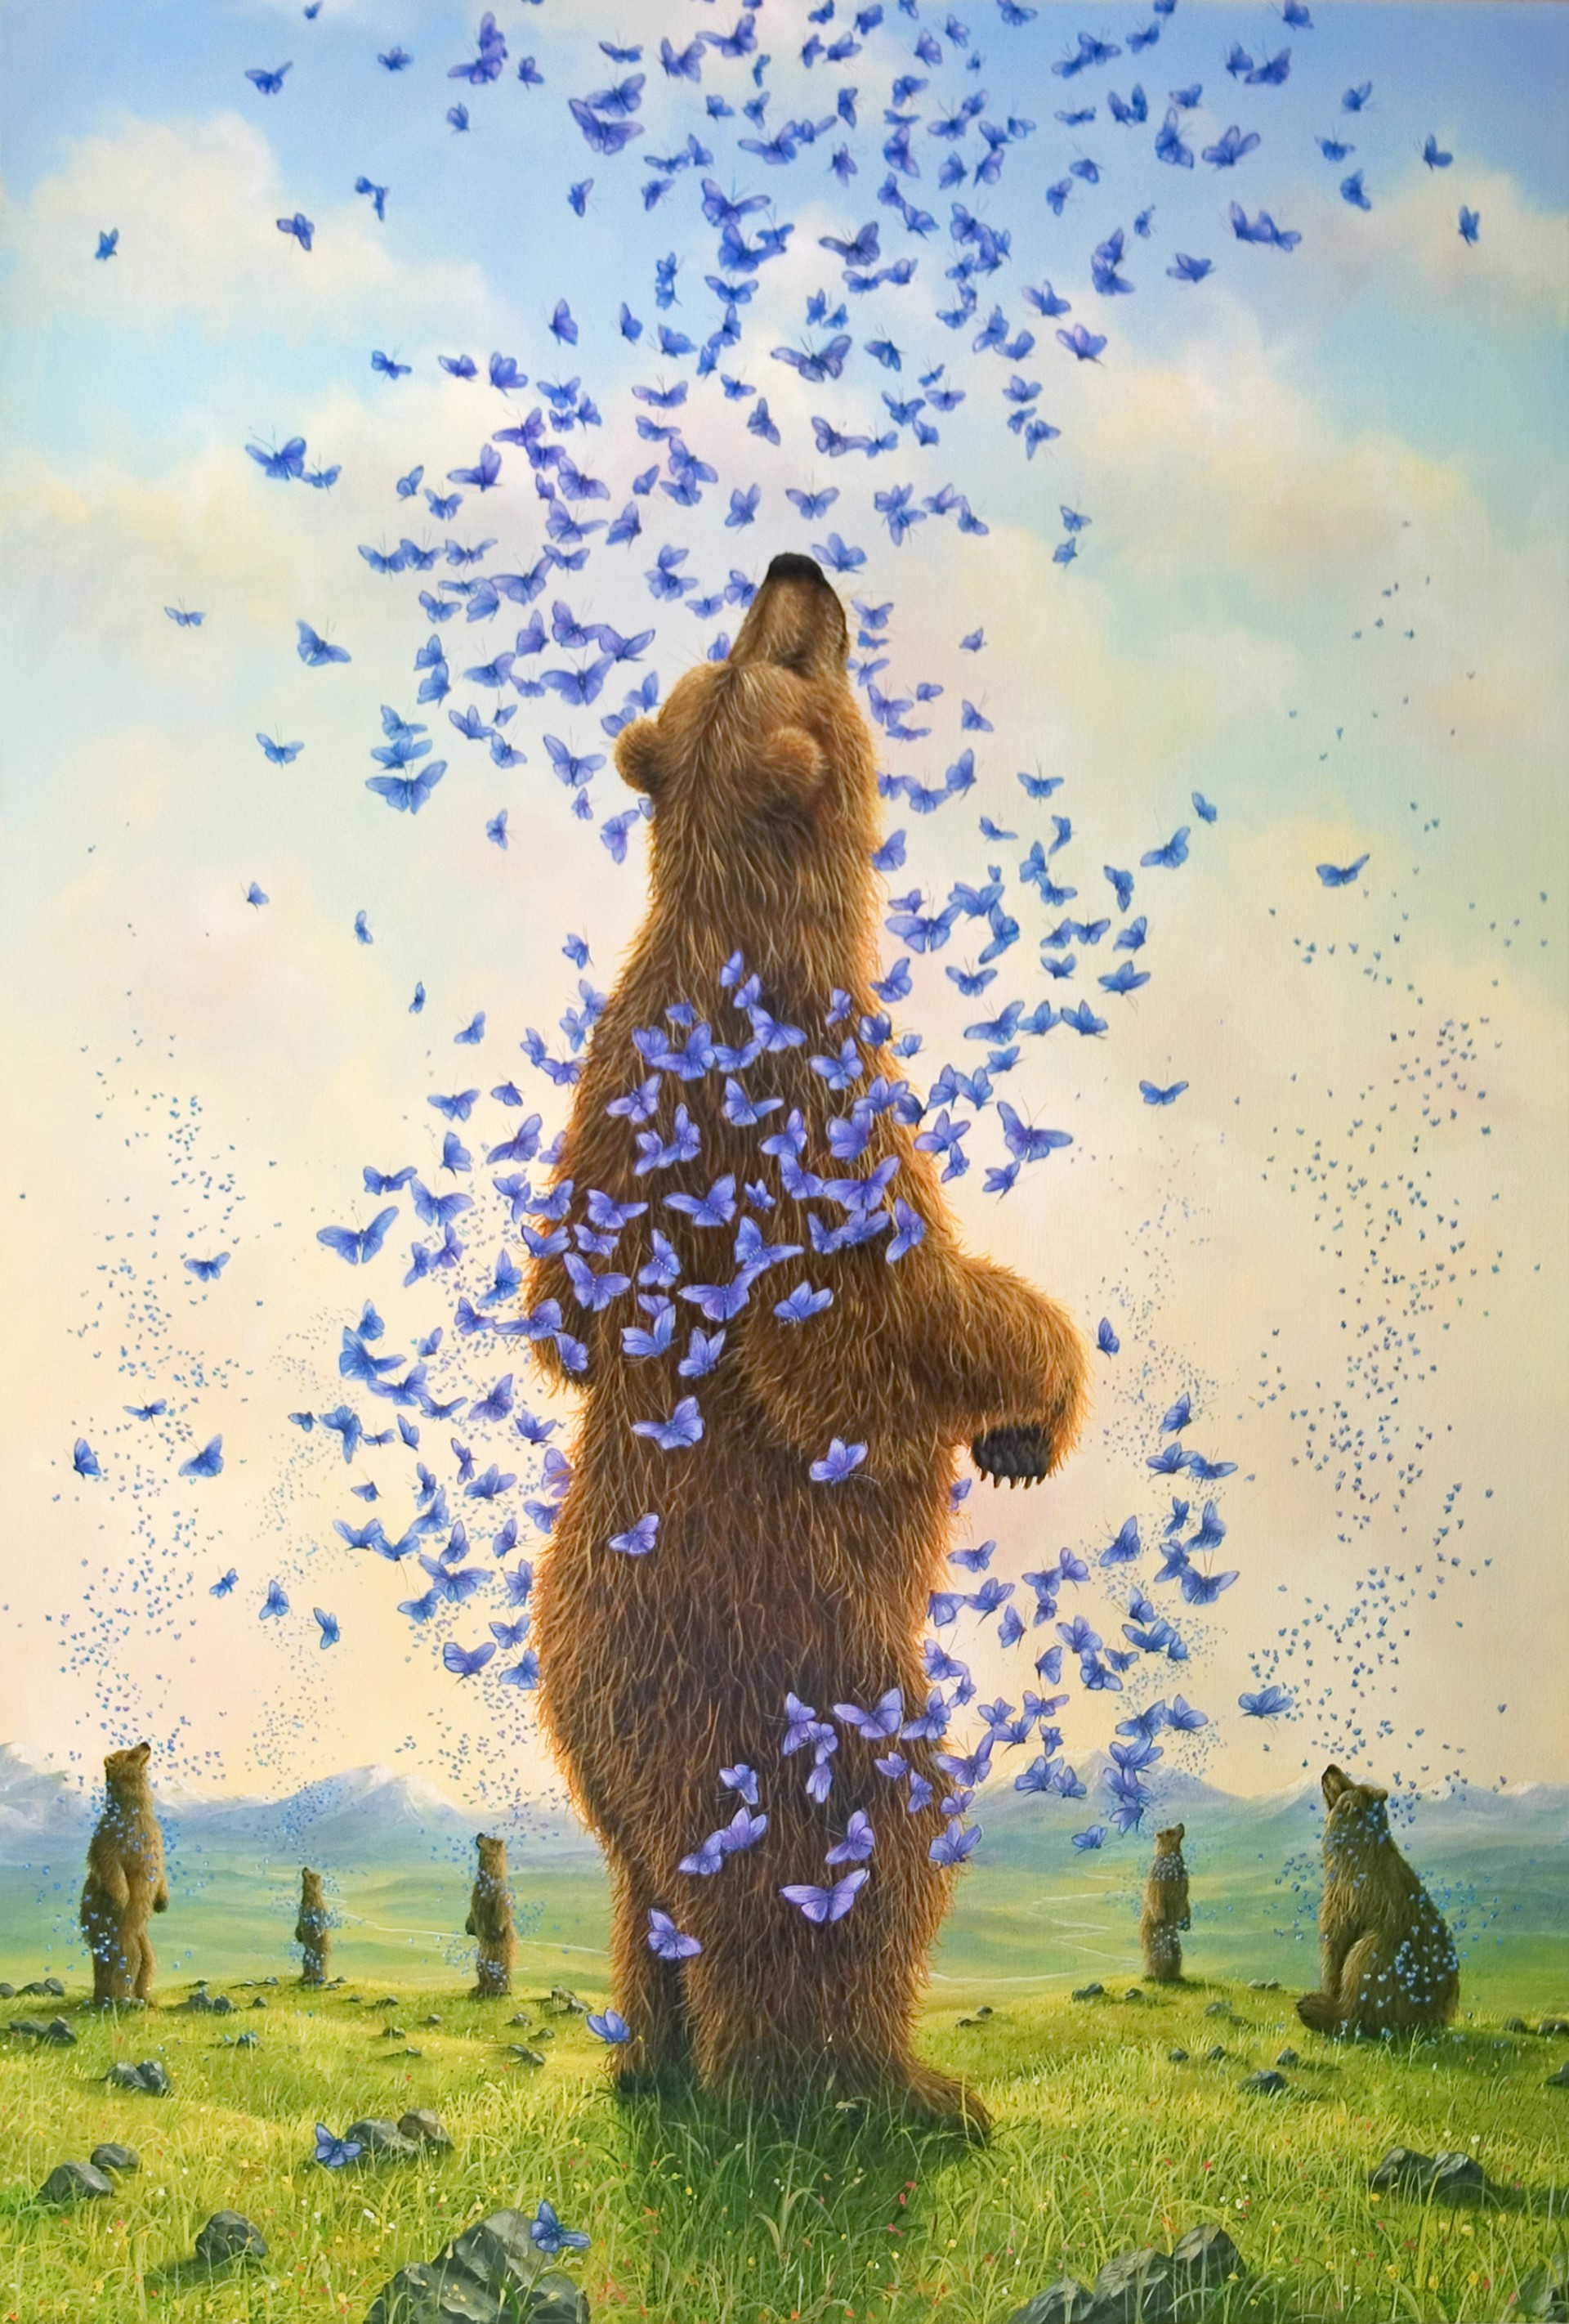 The Embrace - SOLD OUT ON ALL EDITIONS by Robert Bissell